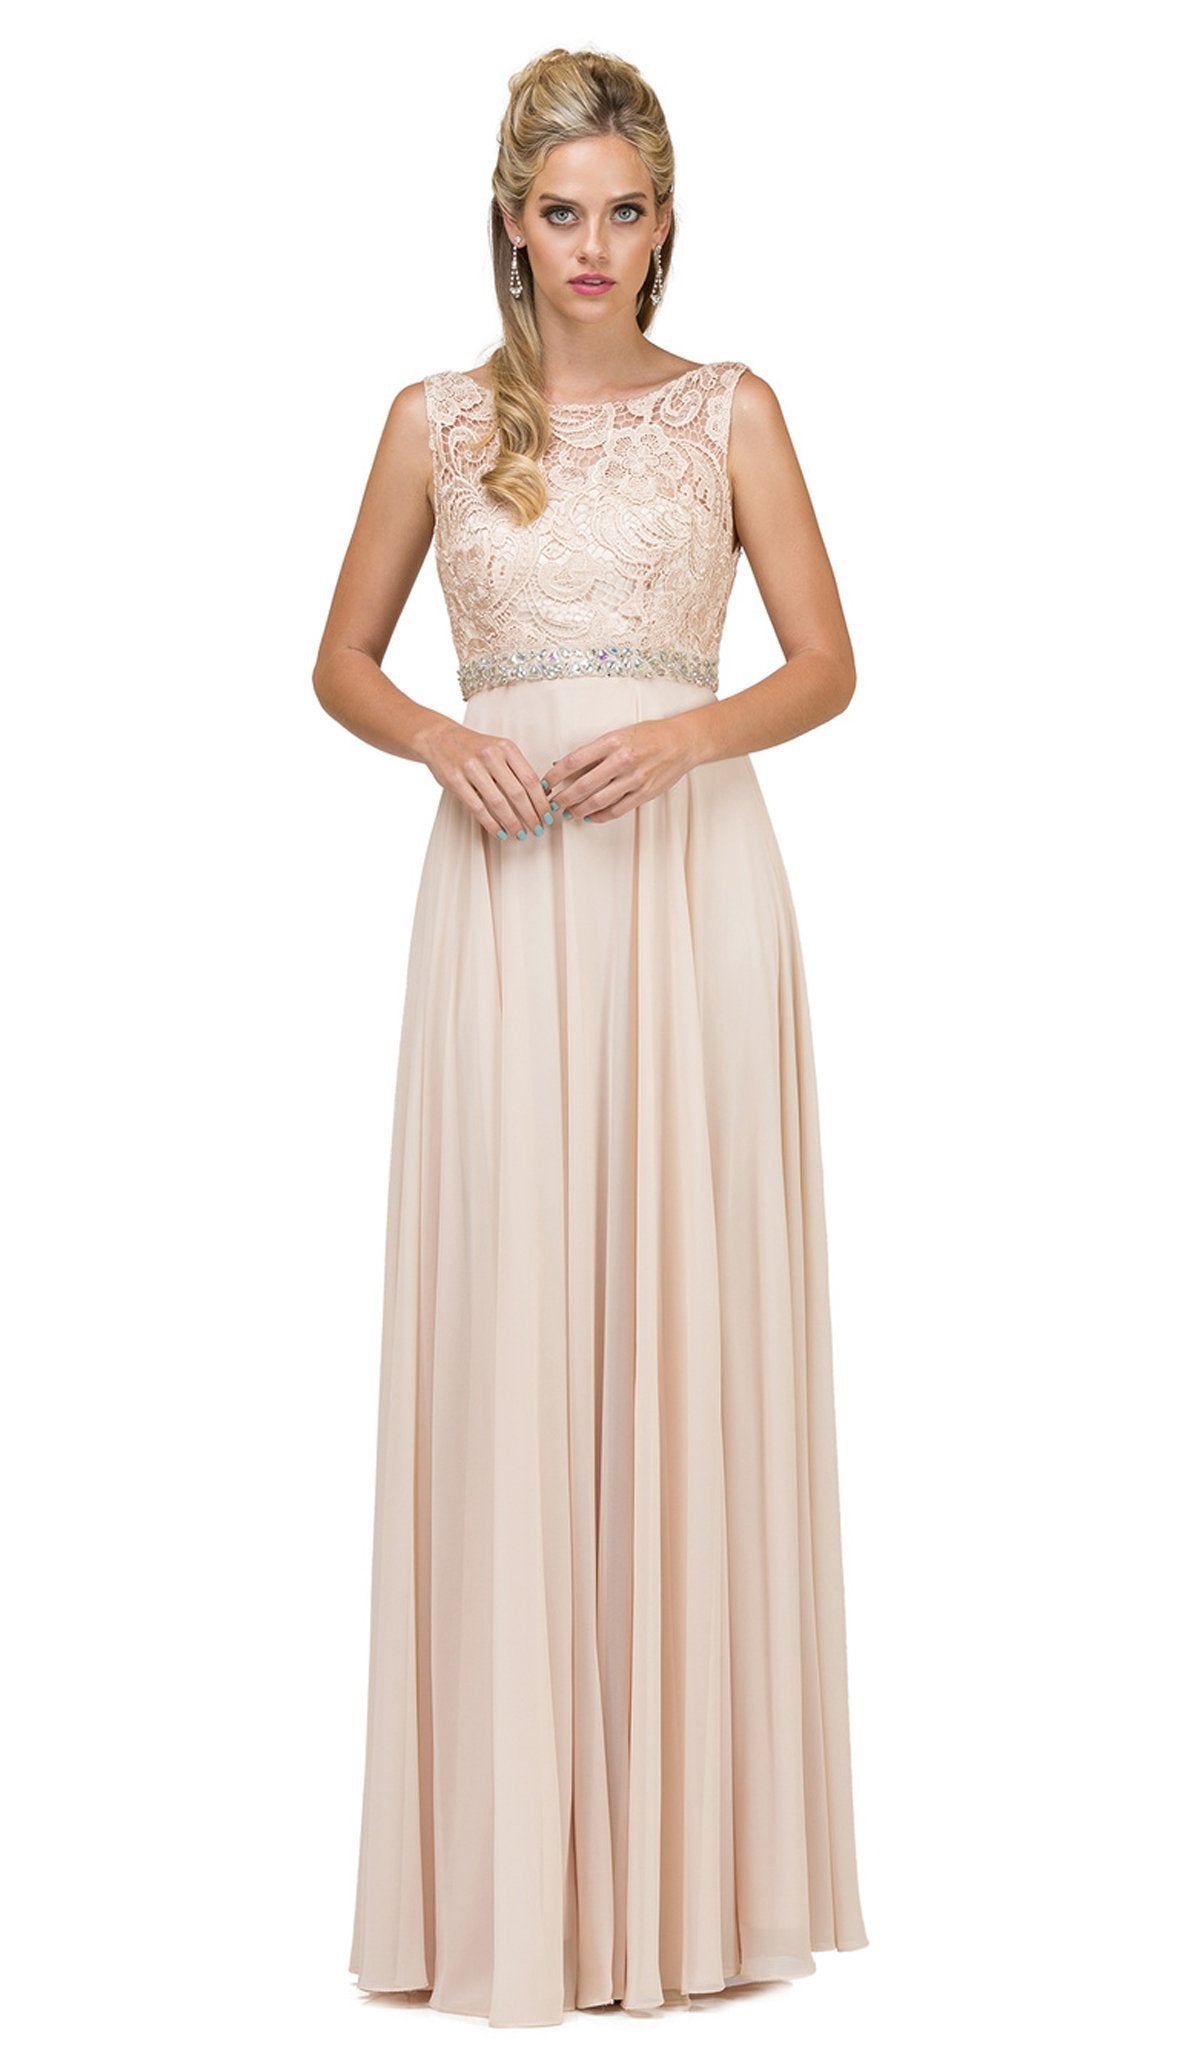 Dancing Queen - 9325 Embroidered Lace Scoop Neck Chiffon Prom Dress Special Occasion Dress XS / Champagne